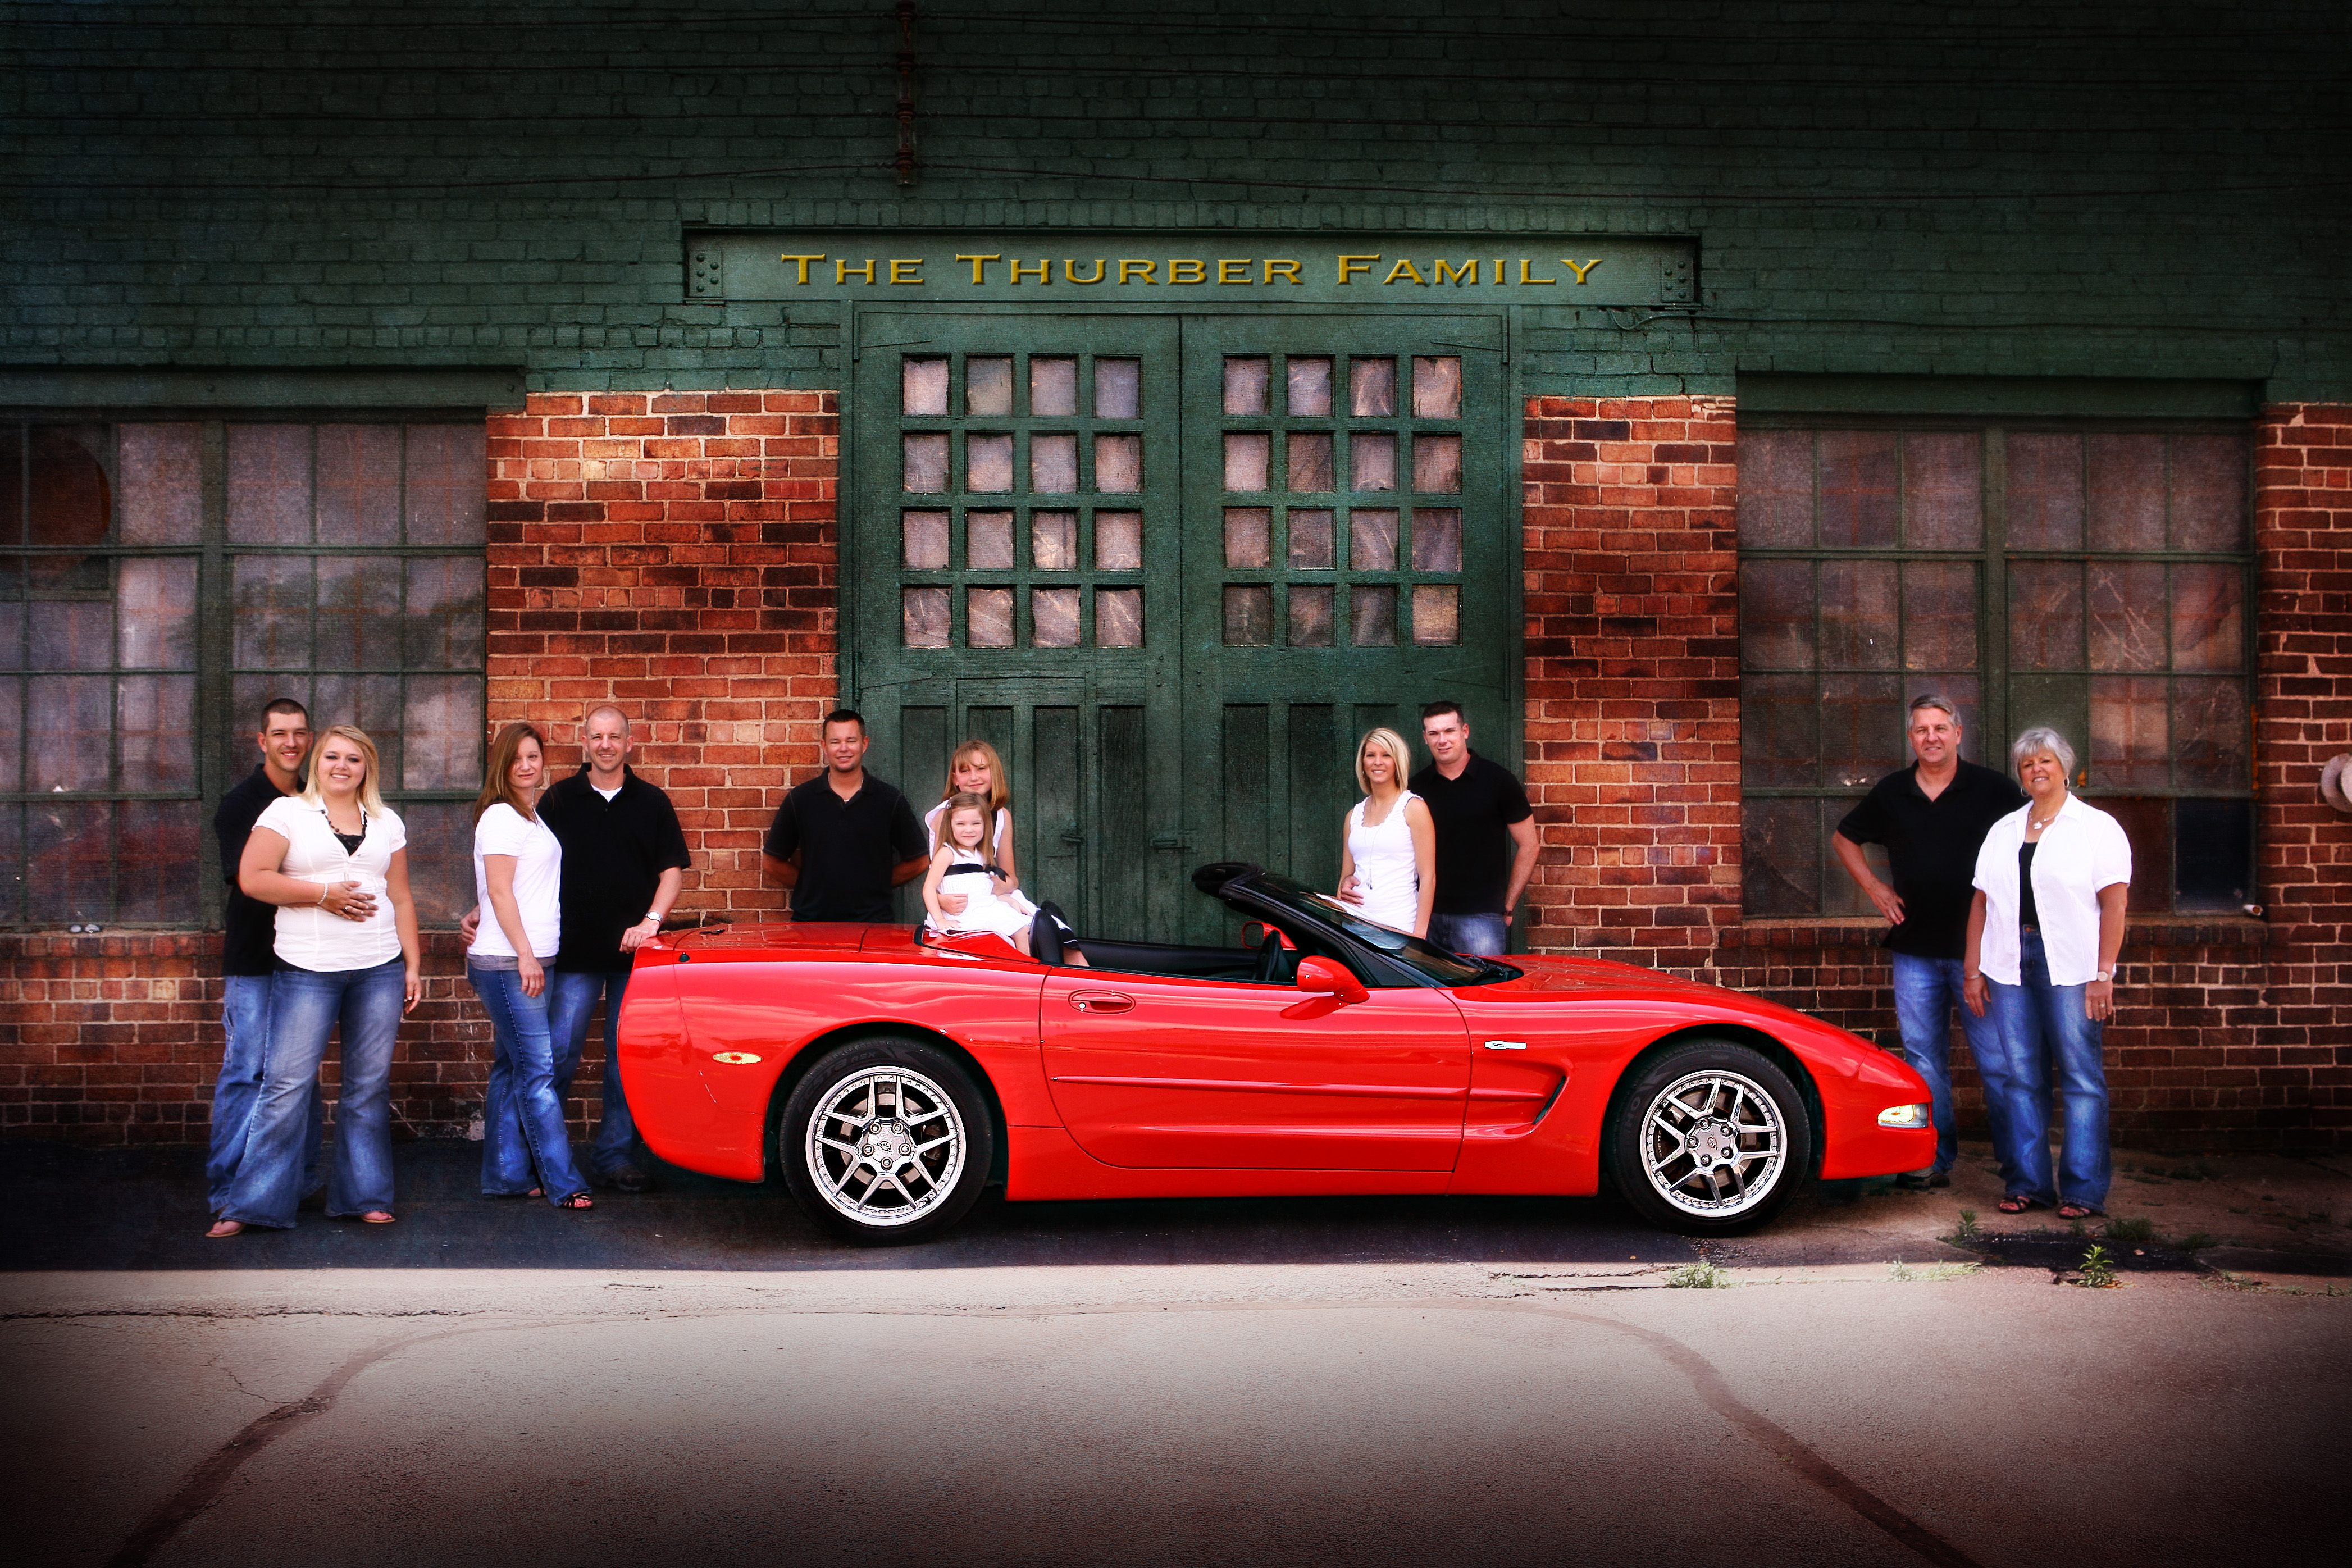 this was such a fun family shoot and of course because i'm a car guy, loved including the Corvette in some of the shots. it was actually a surprise having it there and it wasn't until they pulled up in it and I asked, "do you want some shots with the car" that we set up this shot as well as some other really fun poses. thanks Thurber family for such a great shoot. it was super hot that day but you all did great!